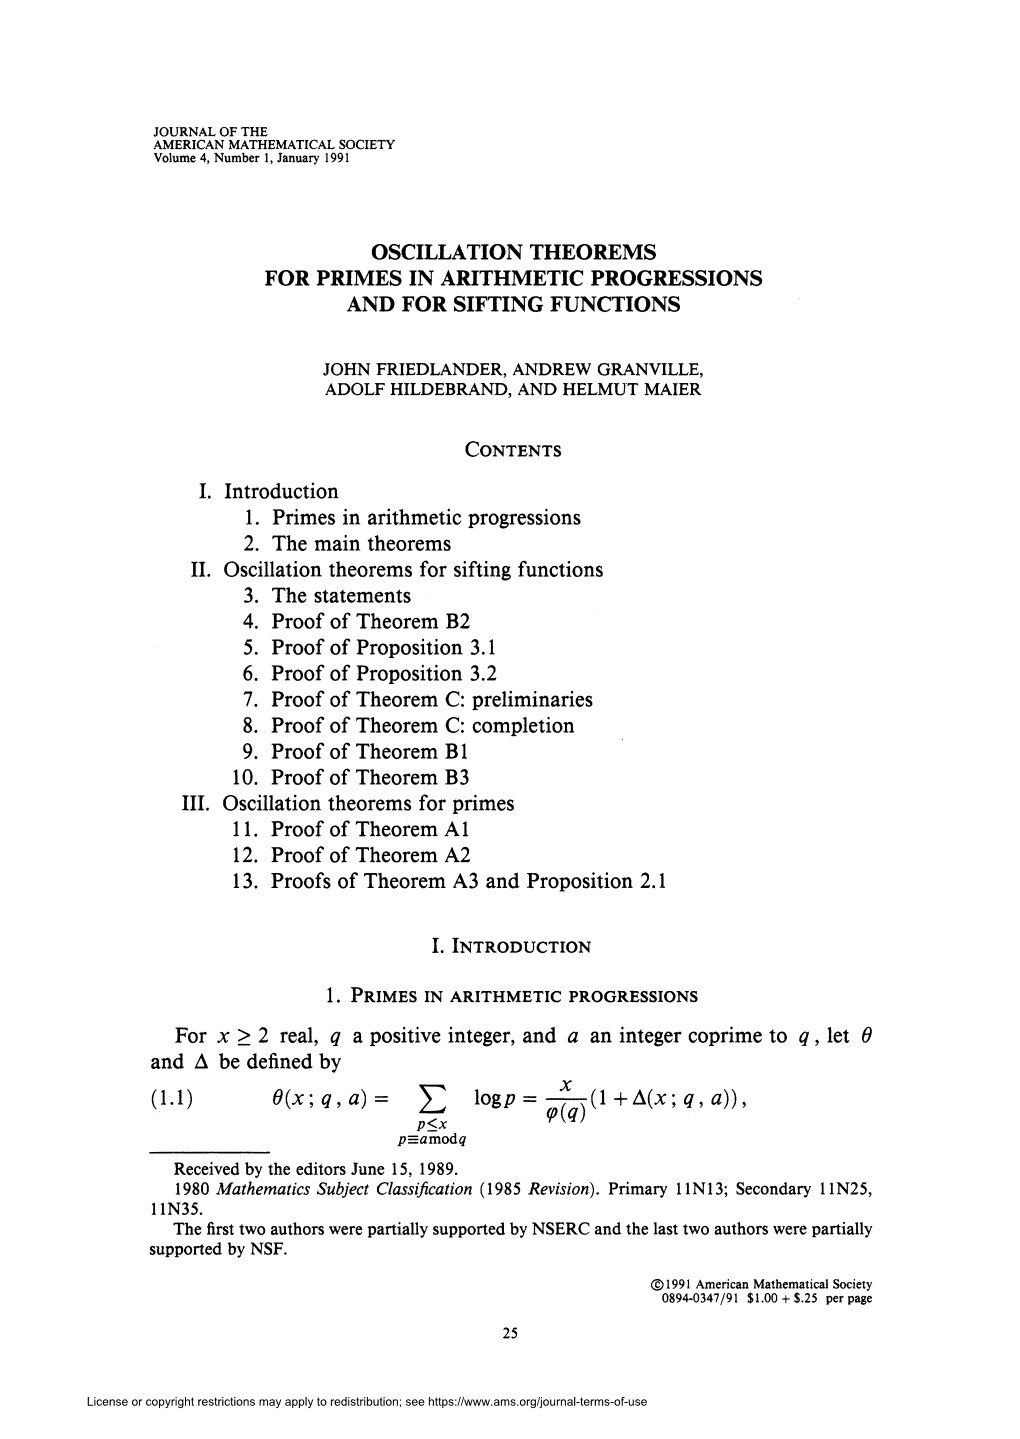 Oscillation Theorems for Primes in Arithmetic Progressions and for Sifting Functions